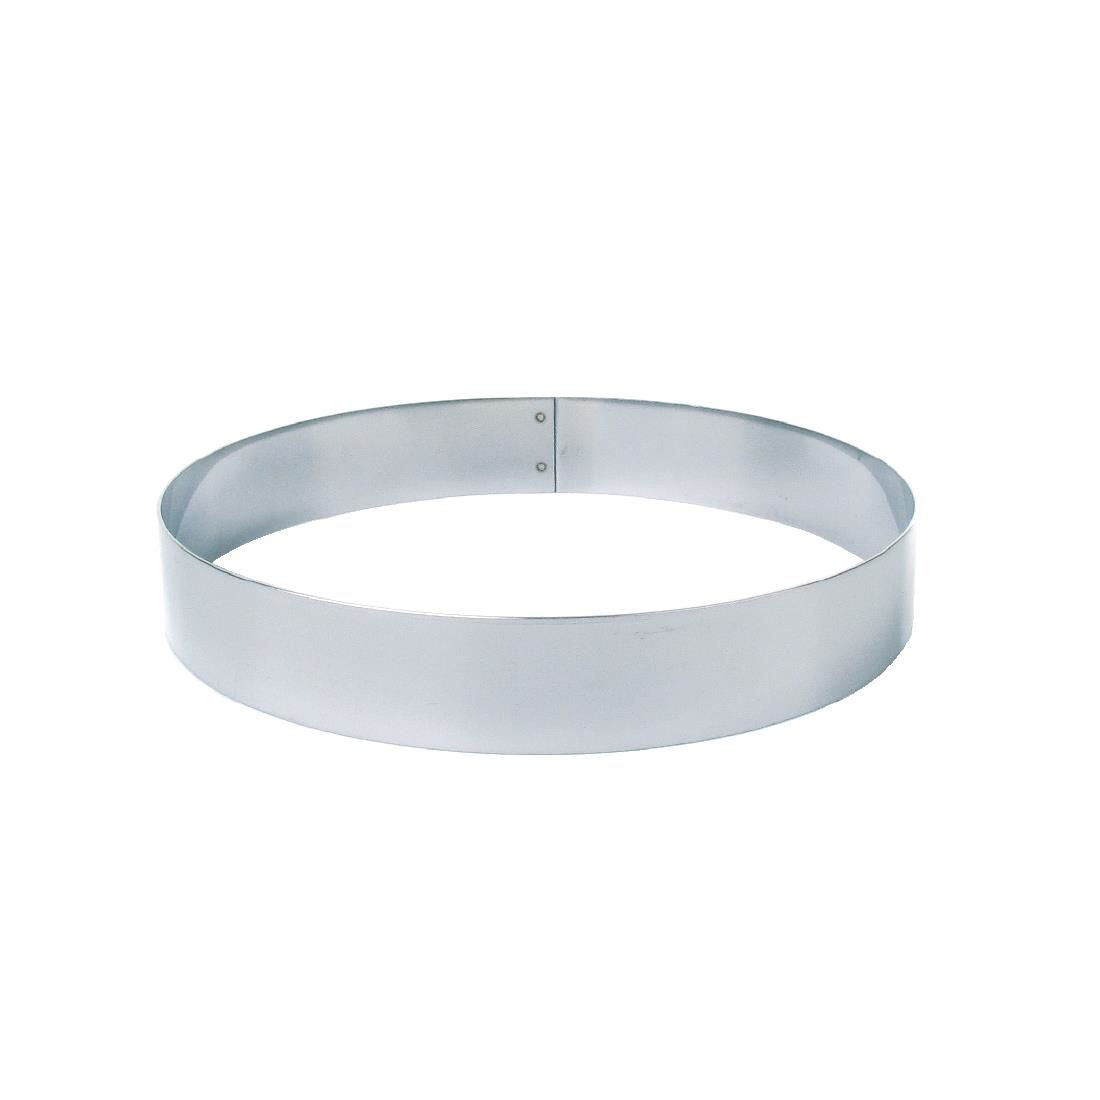 DN957 Matfer Bourgeat Stainless Steel Mousse Ring 45 x 160mm JD Catering Equipment Solutions Ltd